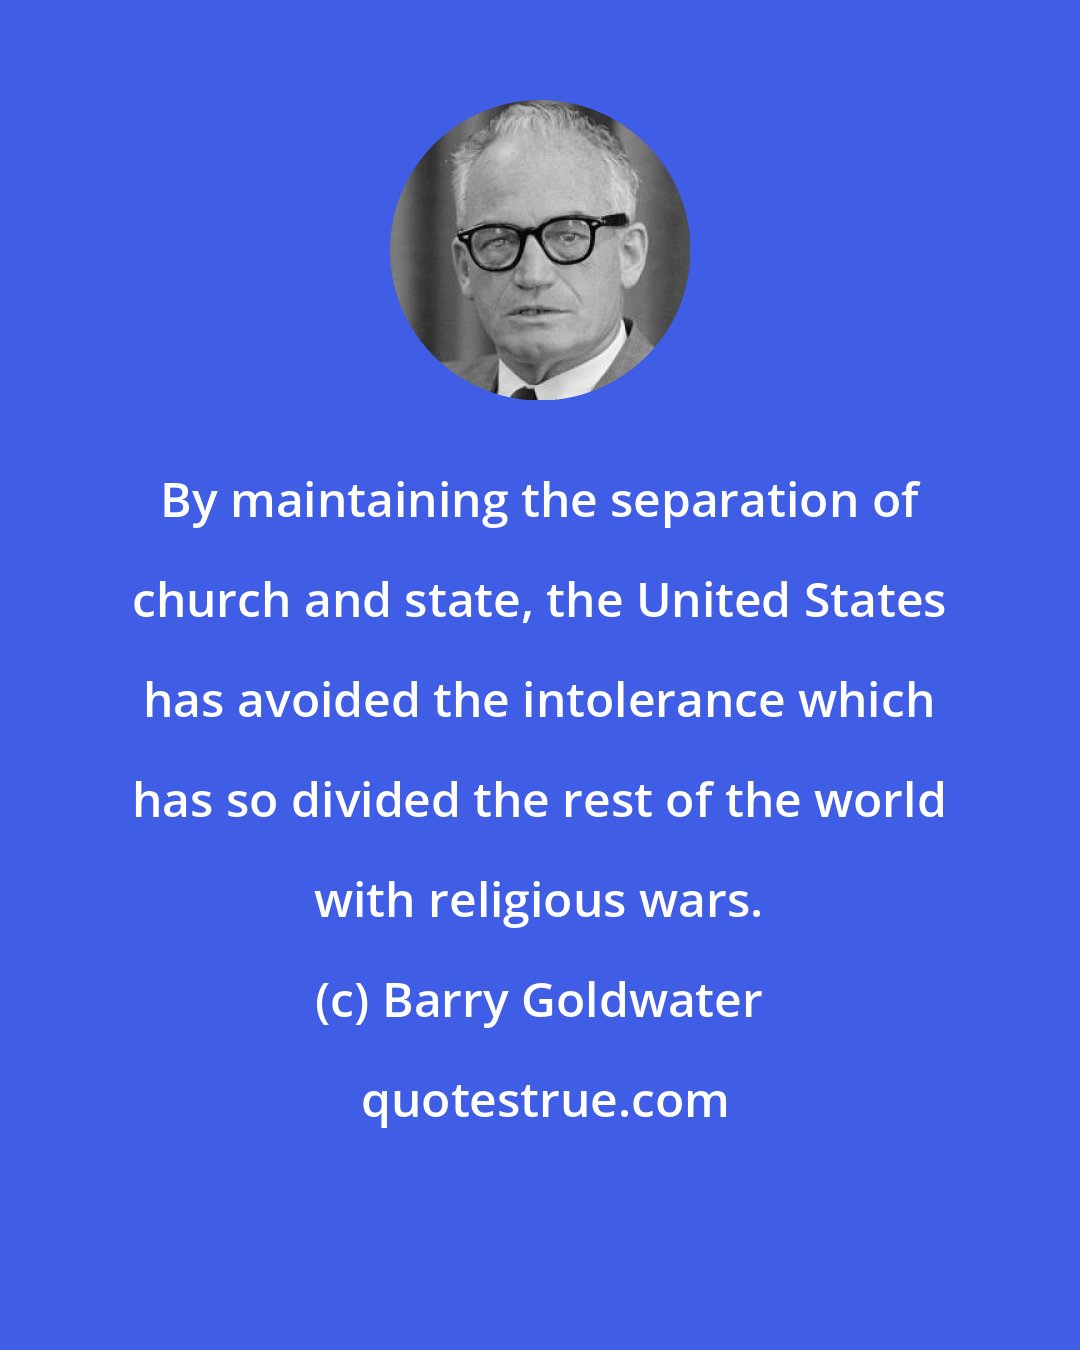 Barry Goldwater: By maintaining the separation of church and state, the United States has avoided the intolerance which has so divided the rest of the world with religious wars.